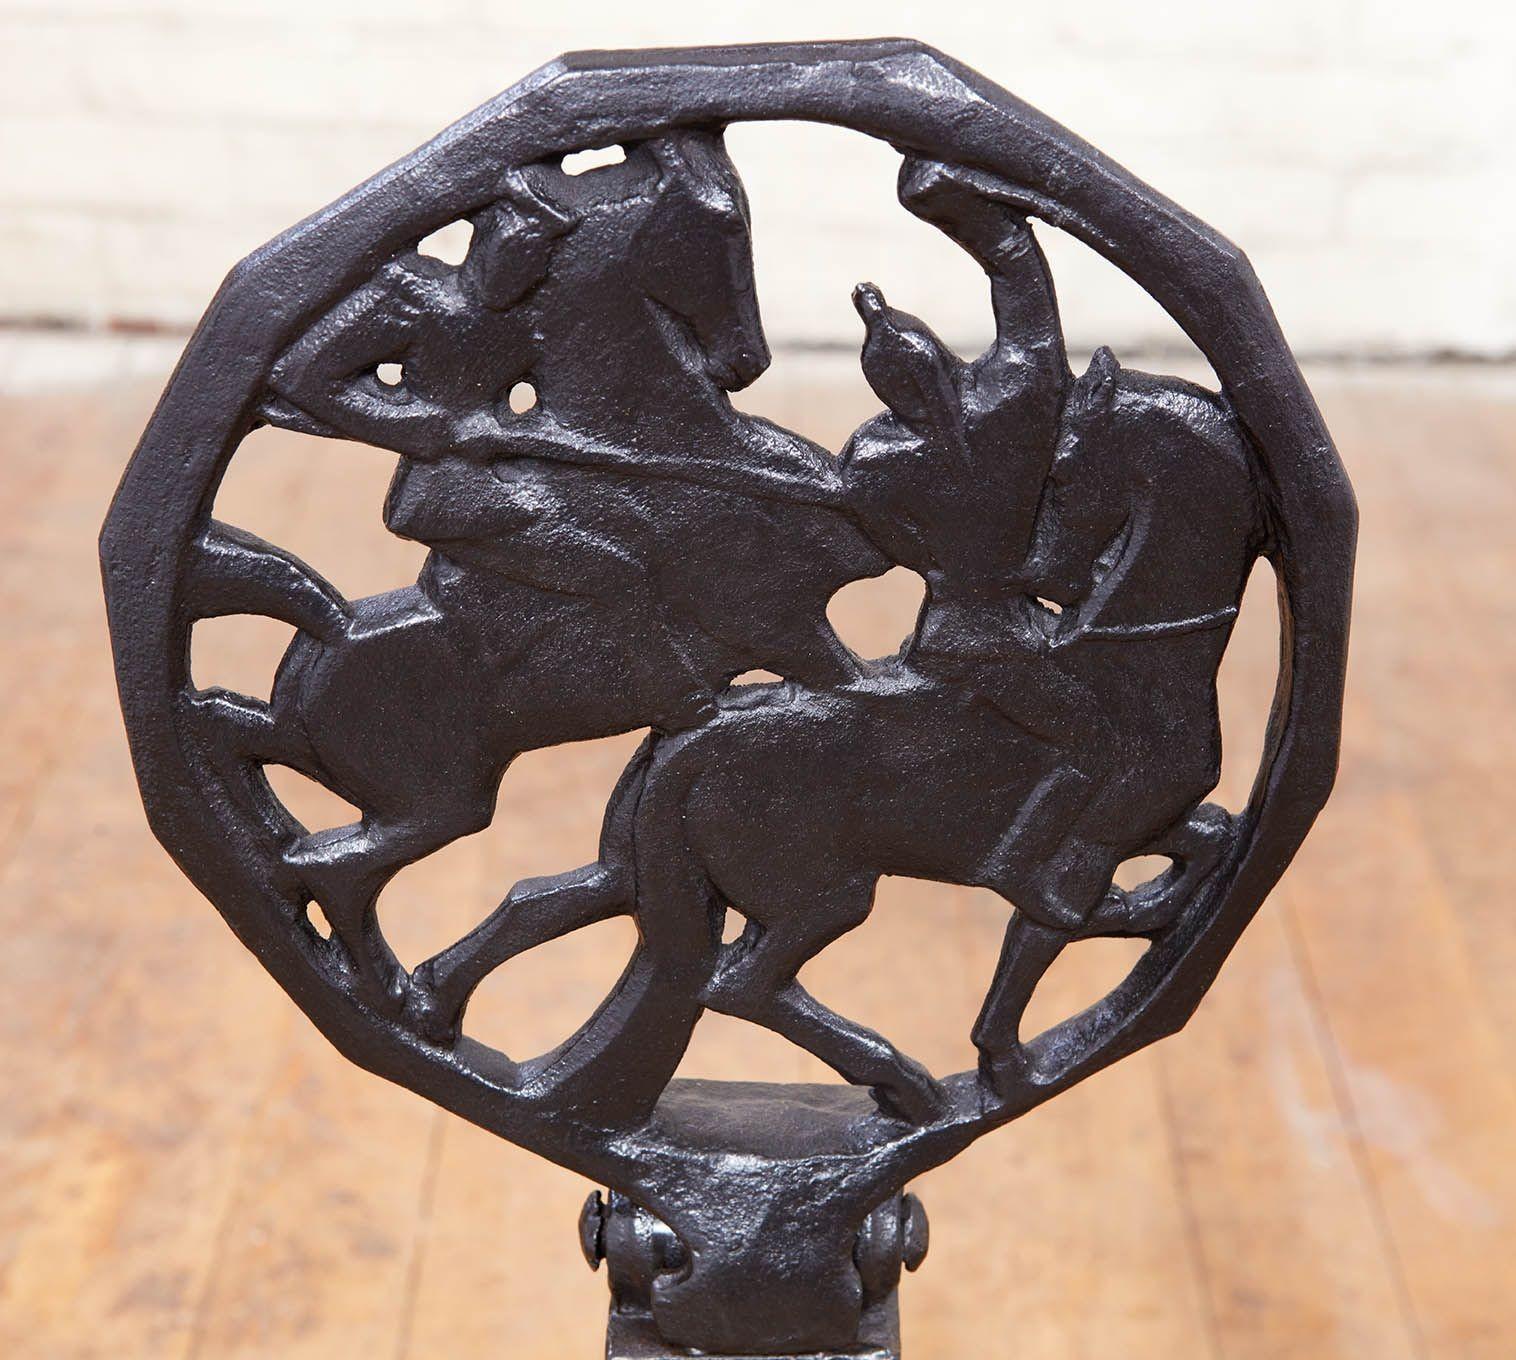 A pair of heavy gauge black wrought iron Art Deco andirons. Unique design having roundels with horsemen filigree casting inside dodecagon (12 sided) surrounds on tapering shafts over arched legs with distinctive sunburst decoration. One andiron with